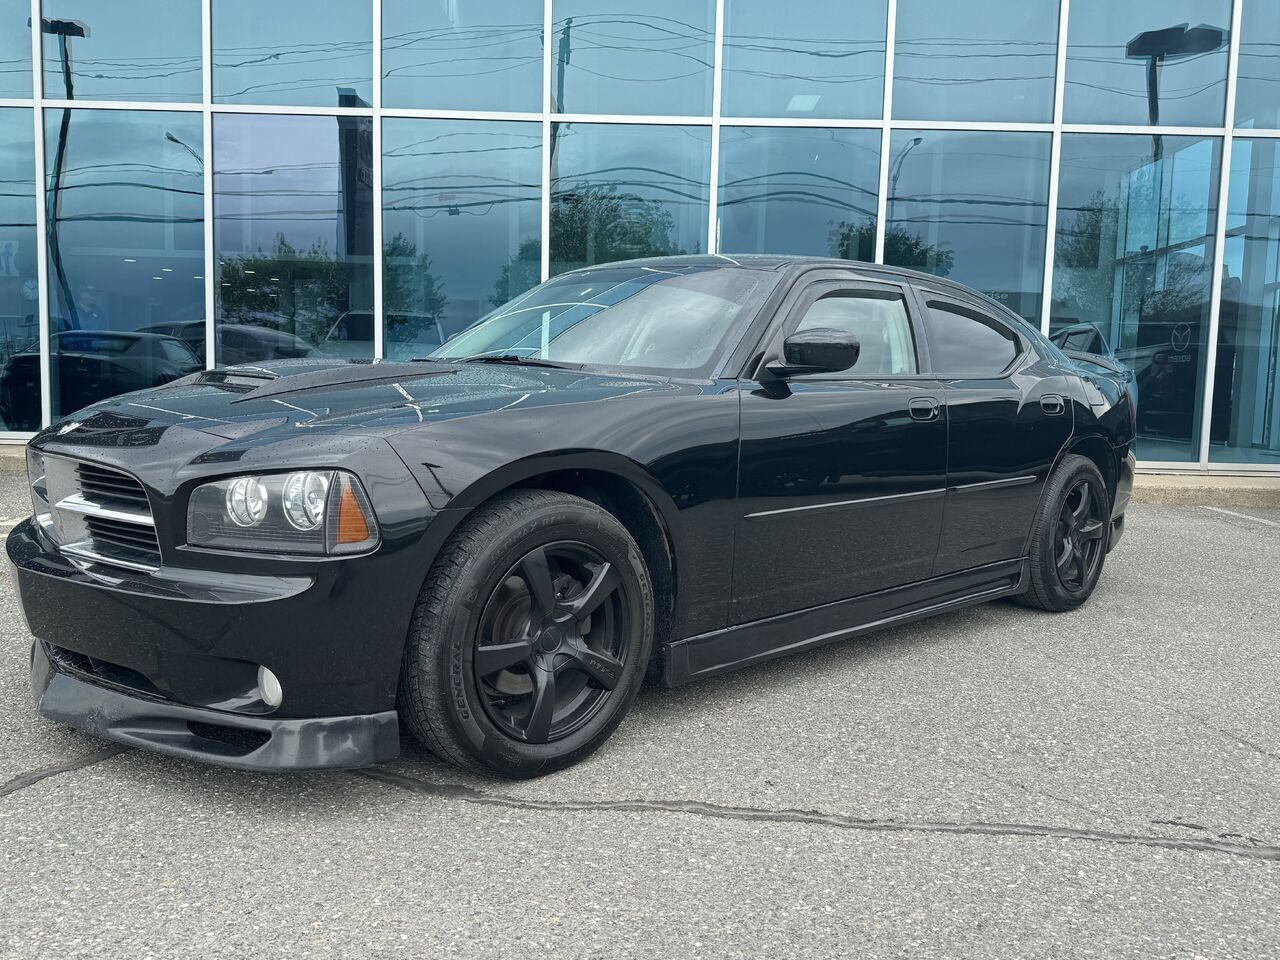 2010 Dodge Charger 4dr Sdn SXT RWD